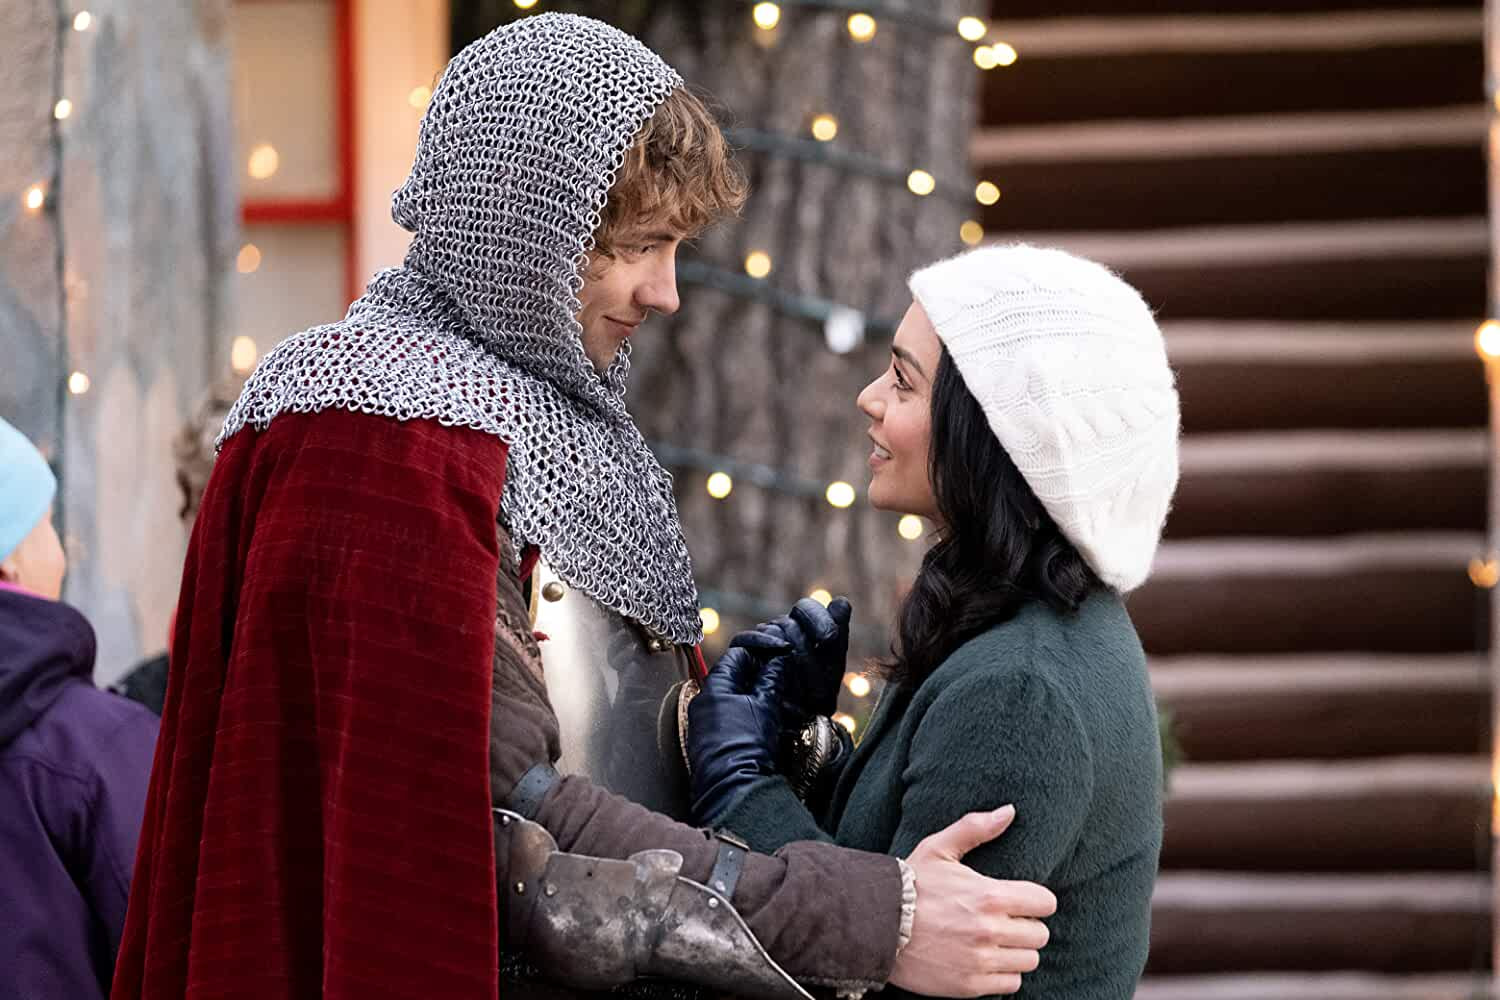 A scene from The Knight Before Christmas